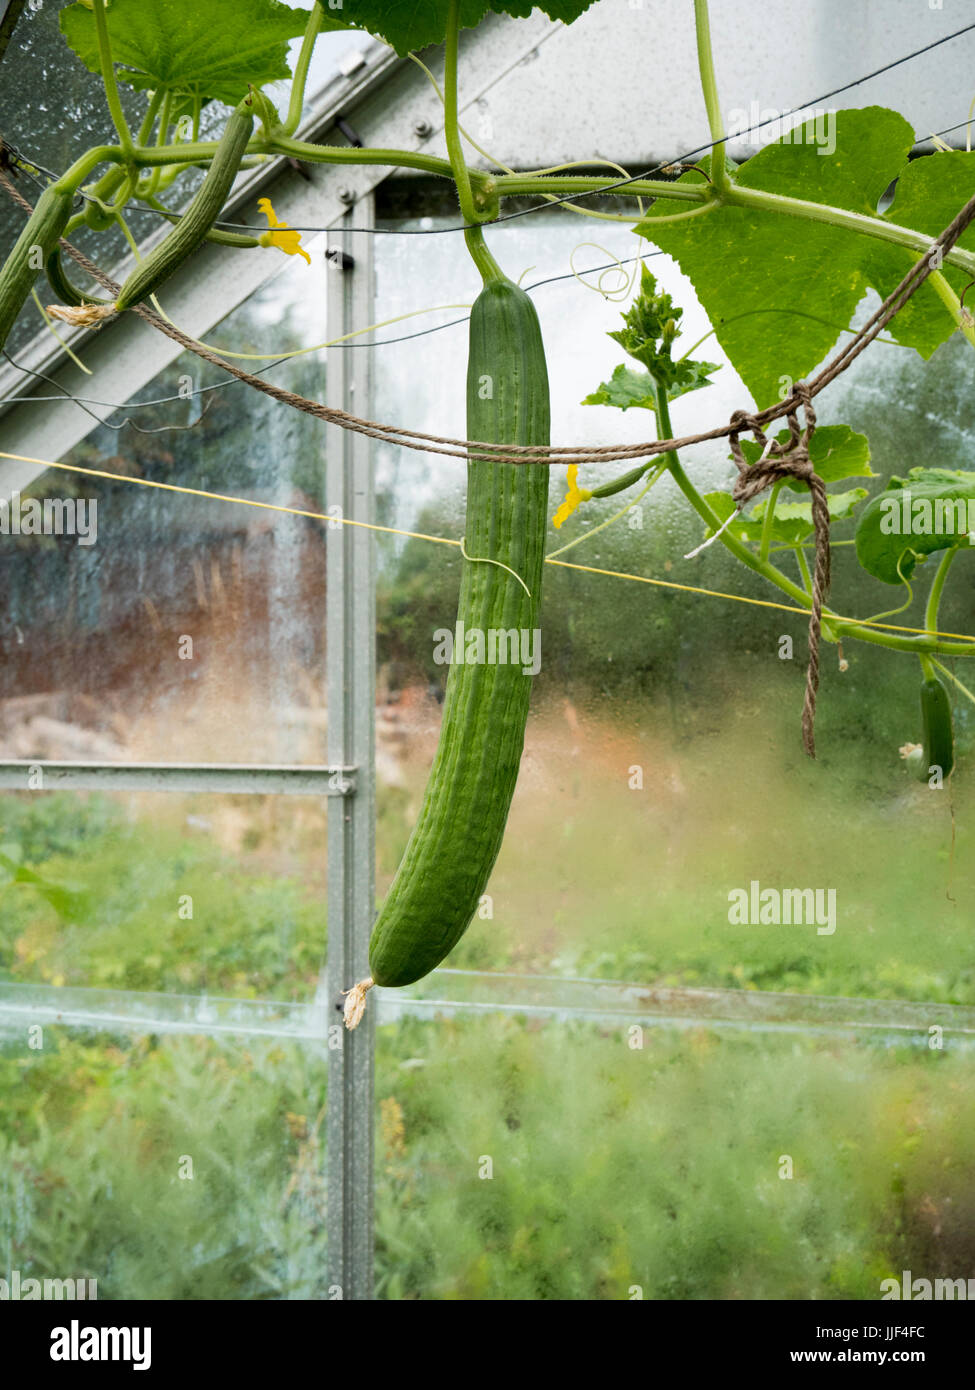 Cucumber plants growing in a domestic or home garden greenhouse Stock Photo